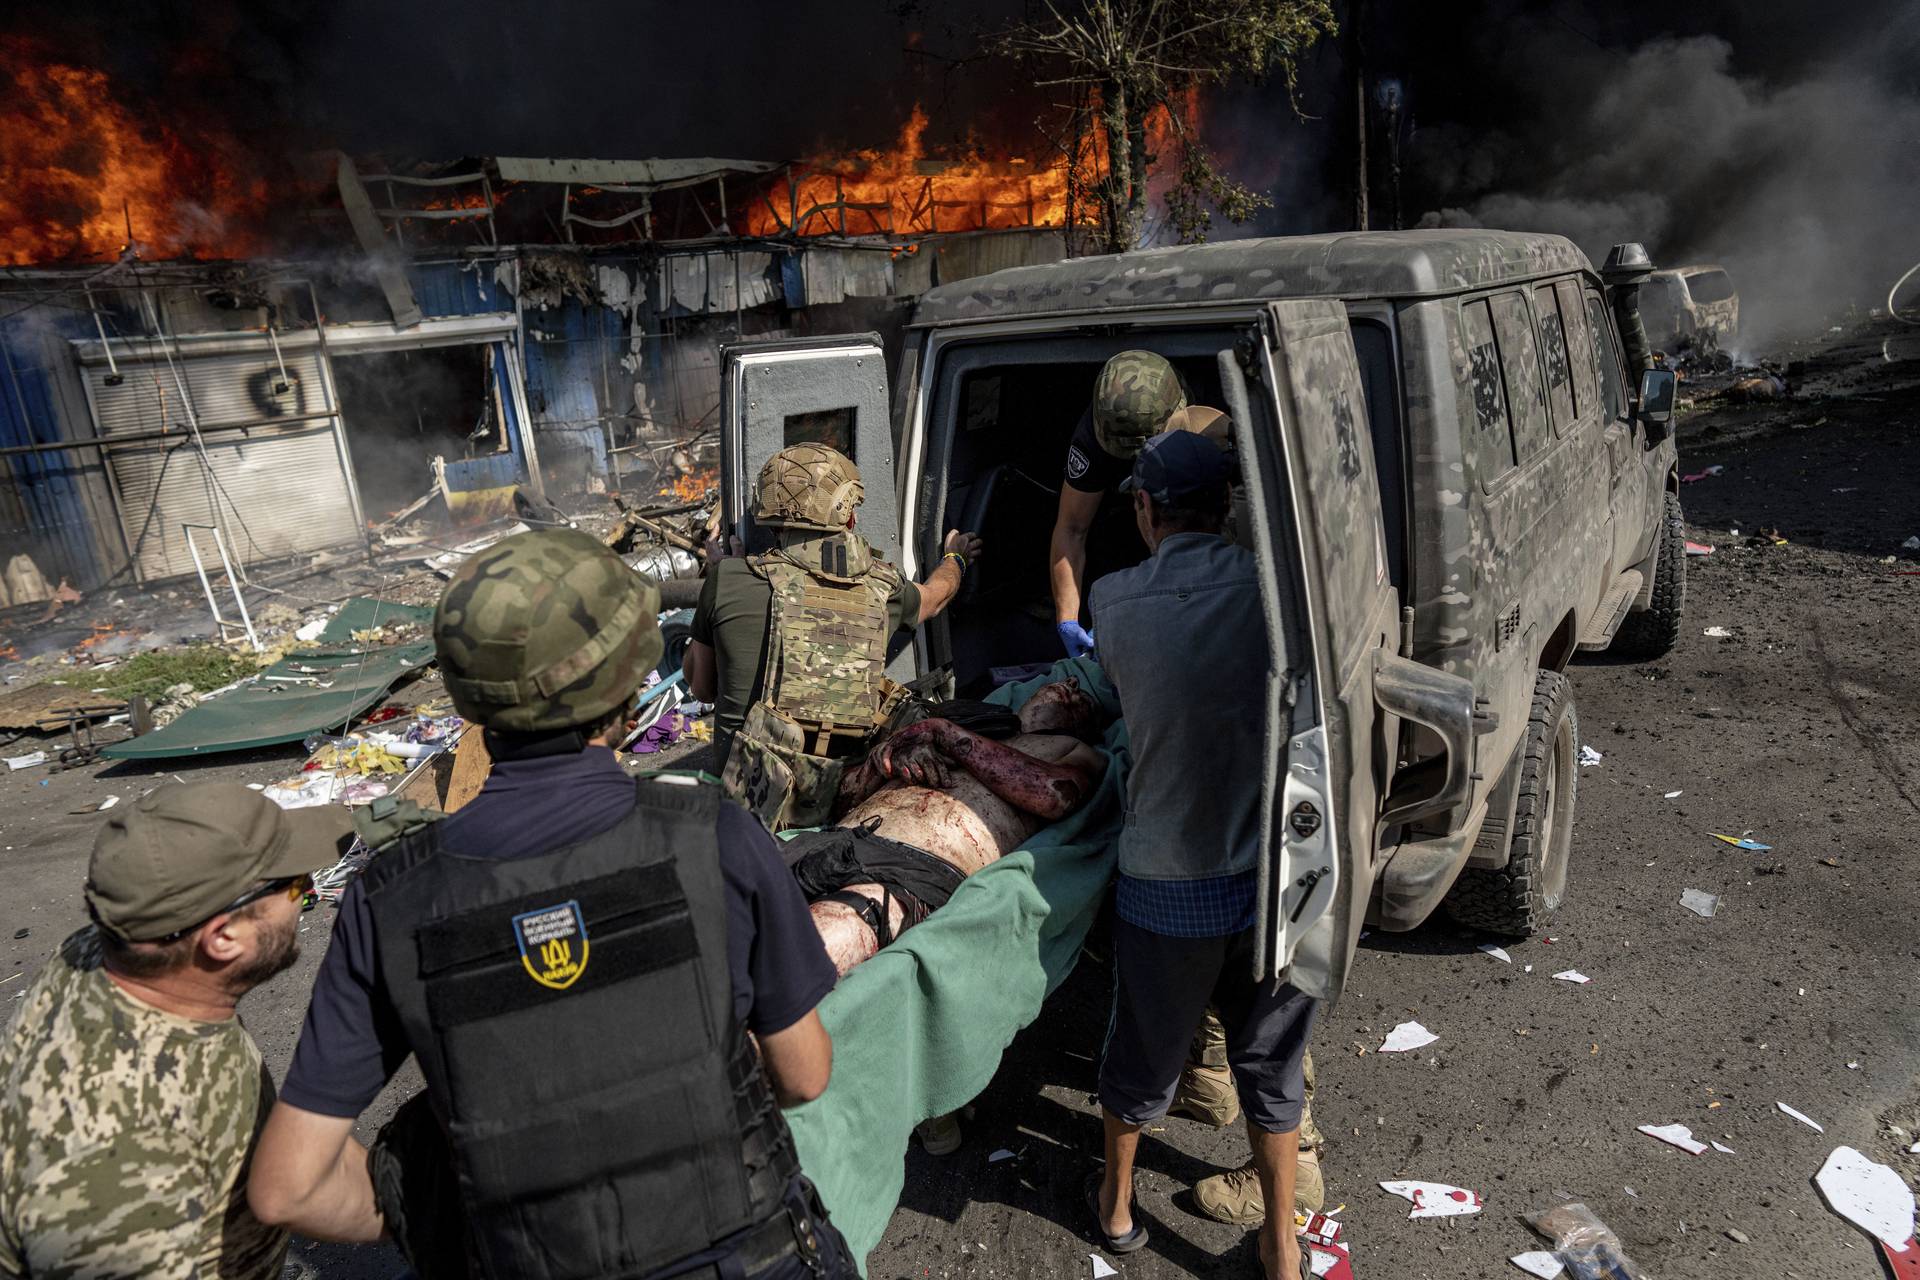 Paramedics carry an injured man into an ambulance after a Russian rocket attack in the city of Kostiantynivka